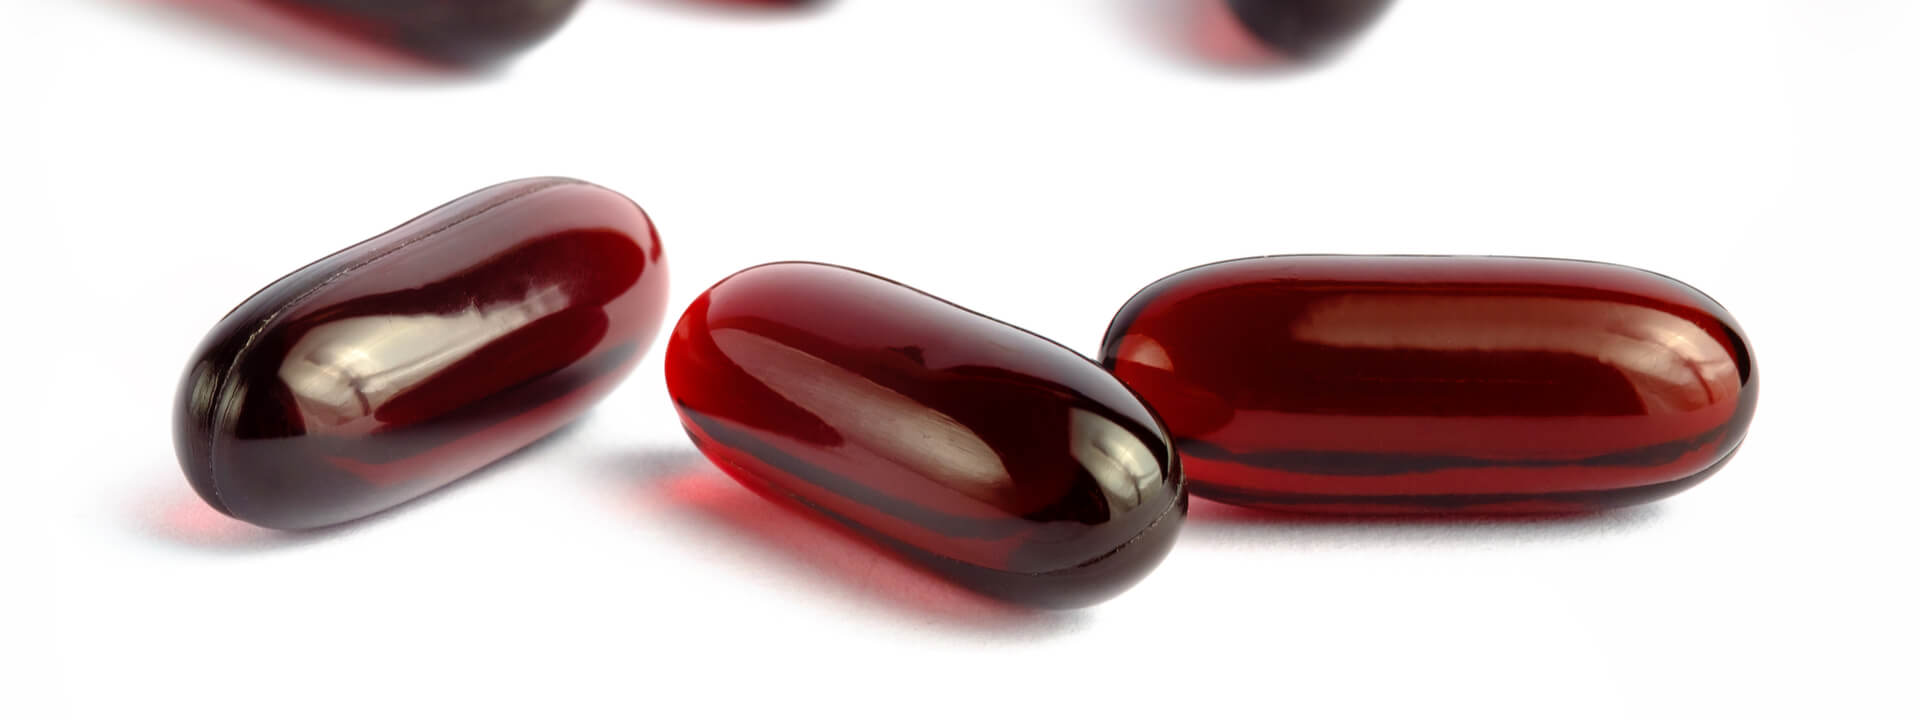 Astaxanthin and Omega 3 Fish Oil: A Potent Antioxidant